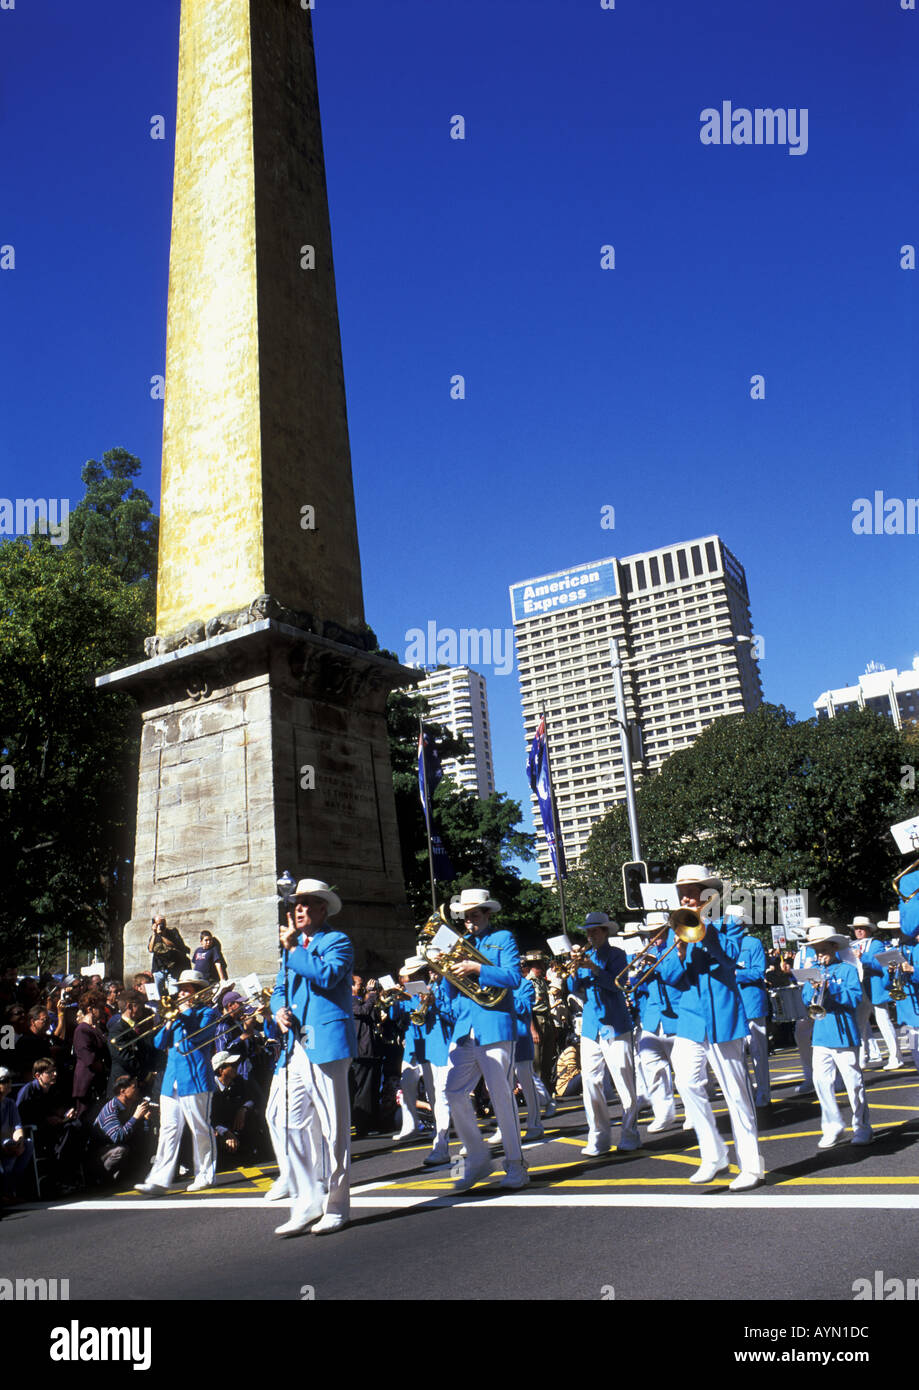 Anzac Day April 25th 2004 Sydney Australia The Youth Band playing and marching past The Cenotaph Hyde Park Stock Photo